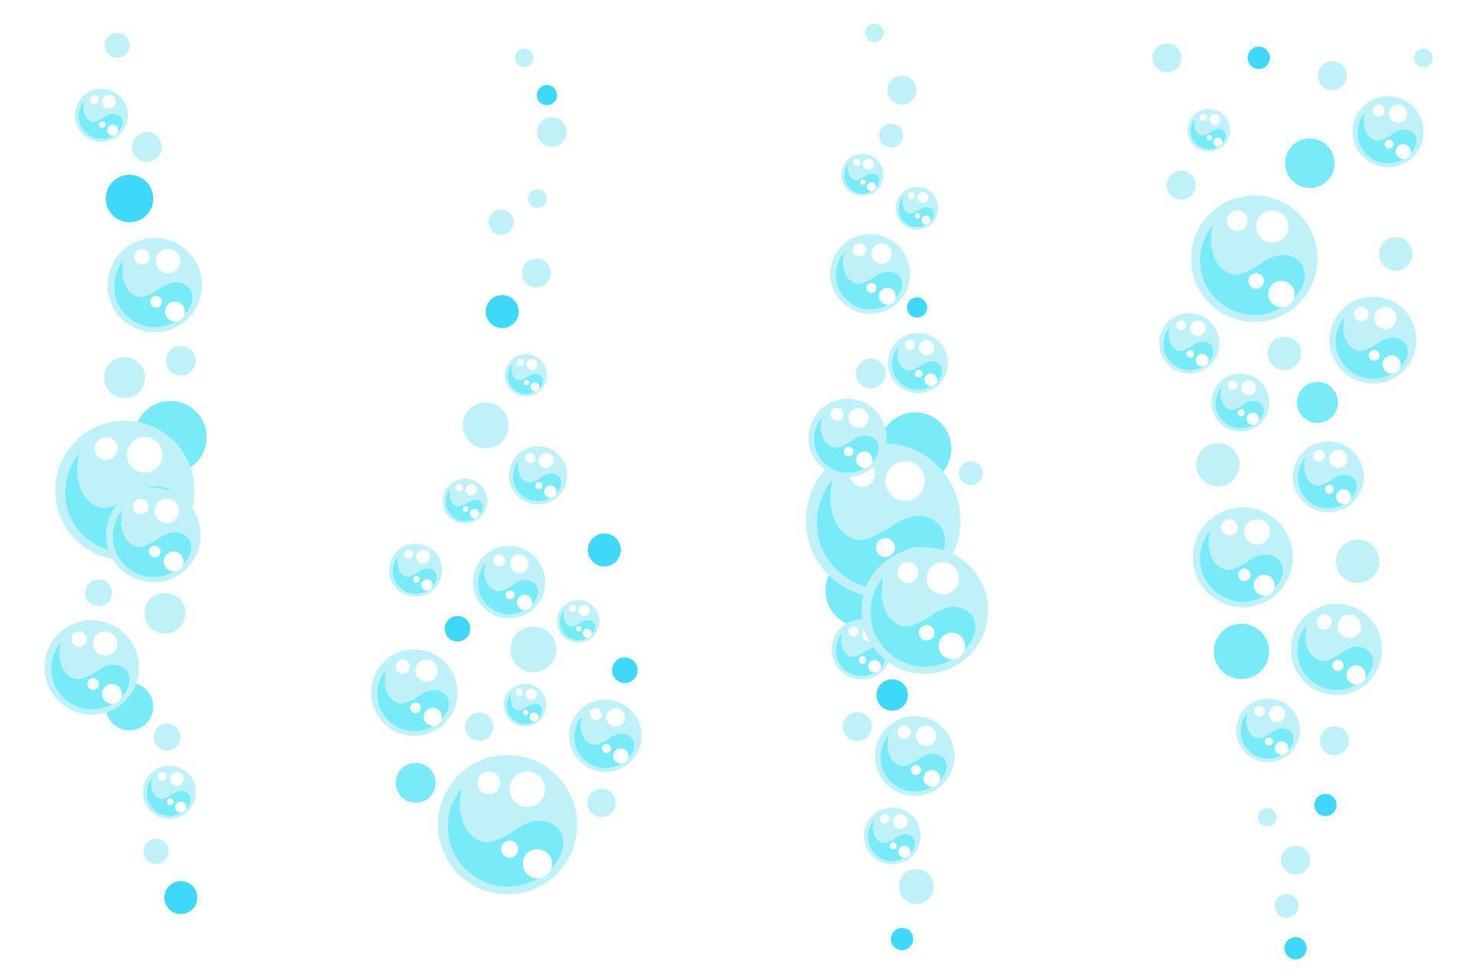 Bubbles of fizzy drink, air or soap. Vertical streams of water. Cartoon vector illustration.